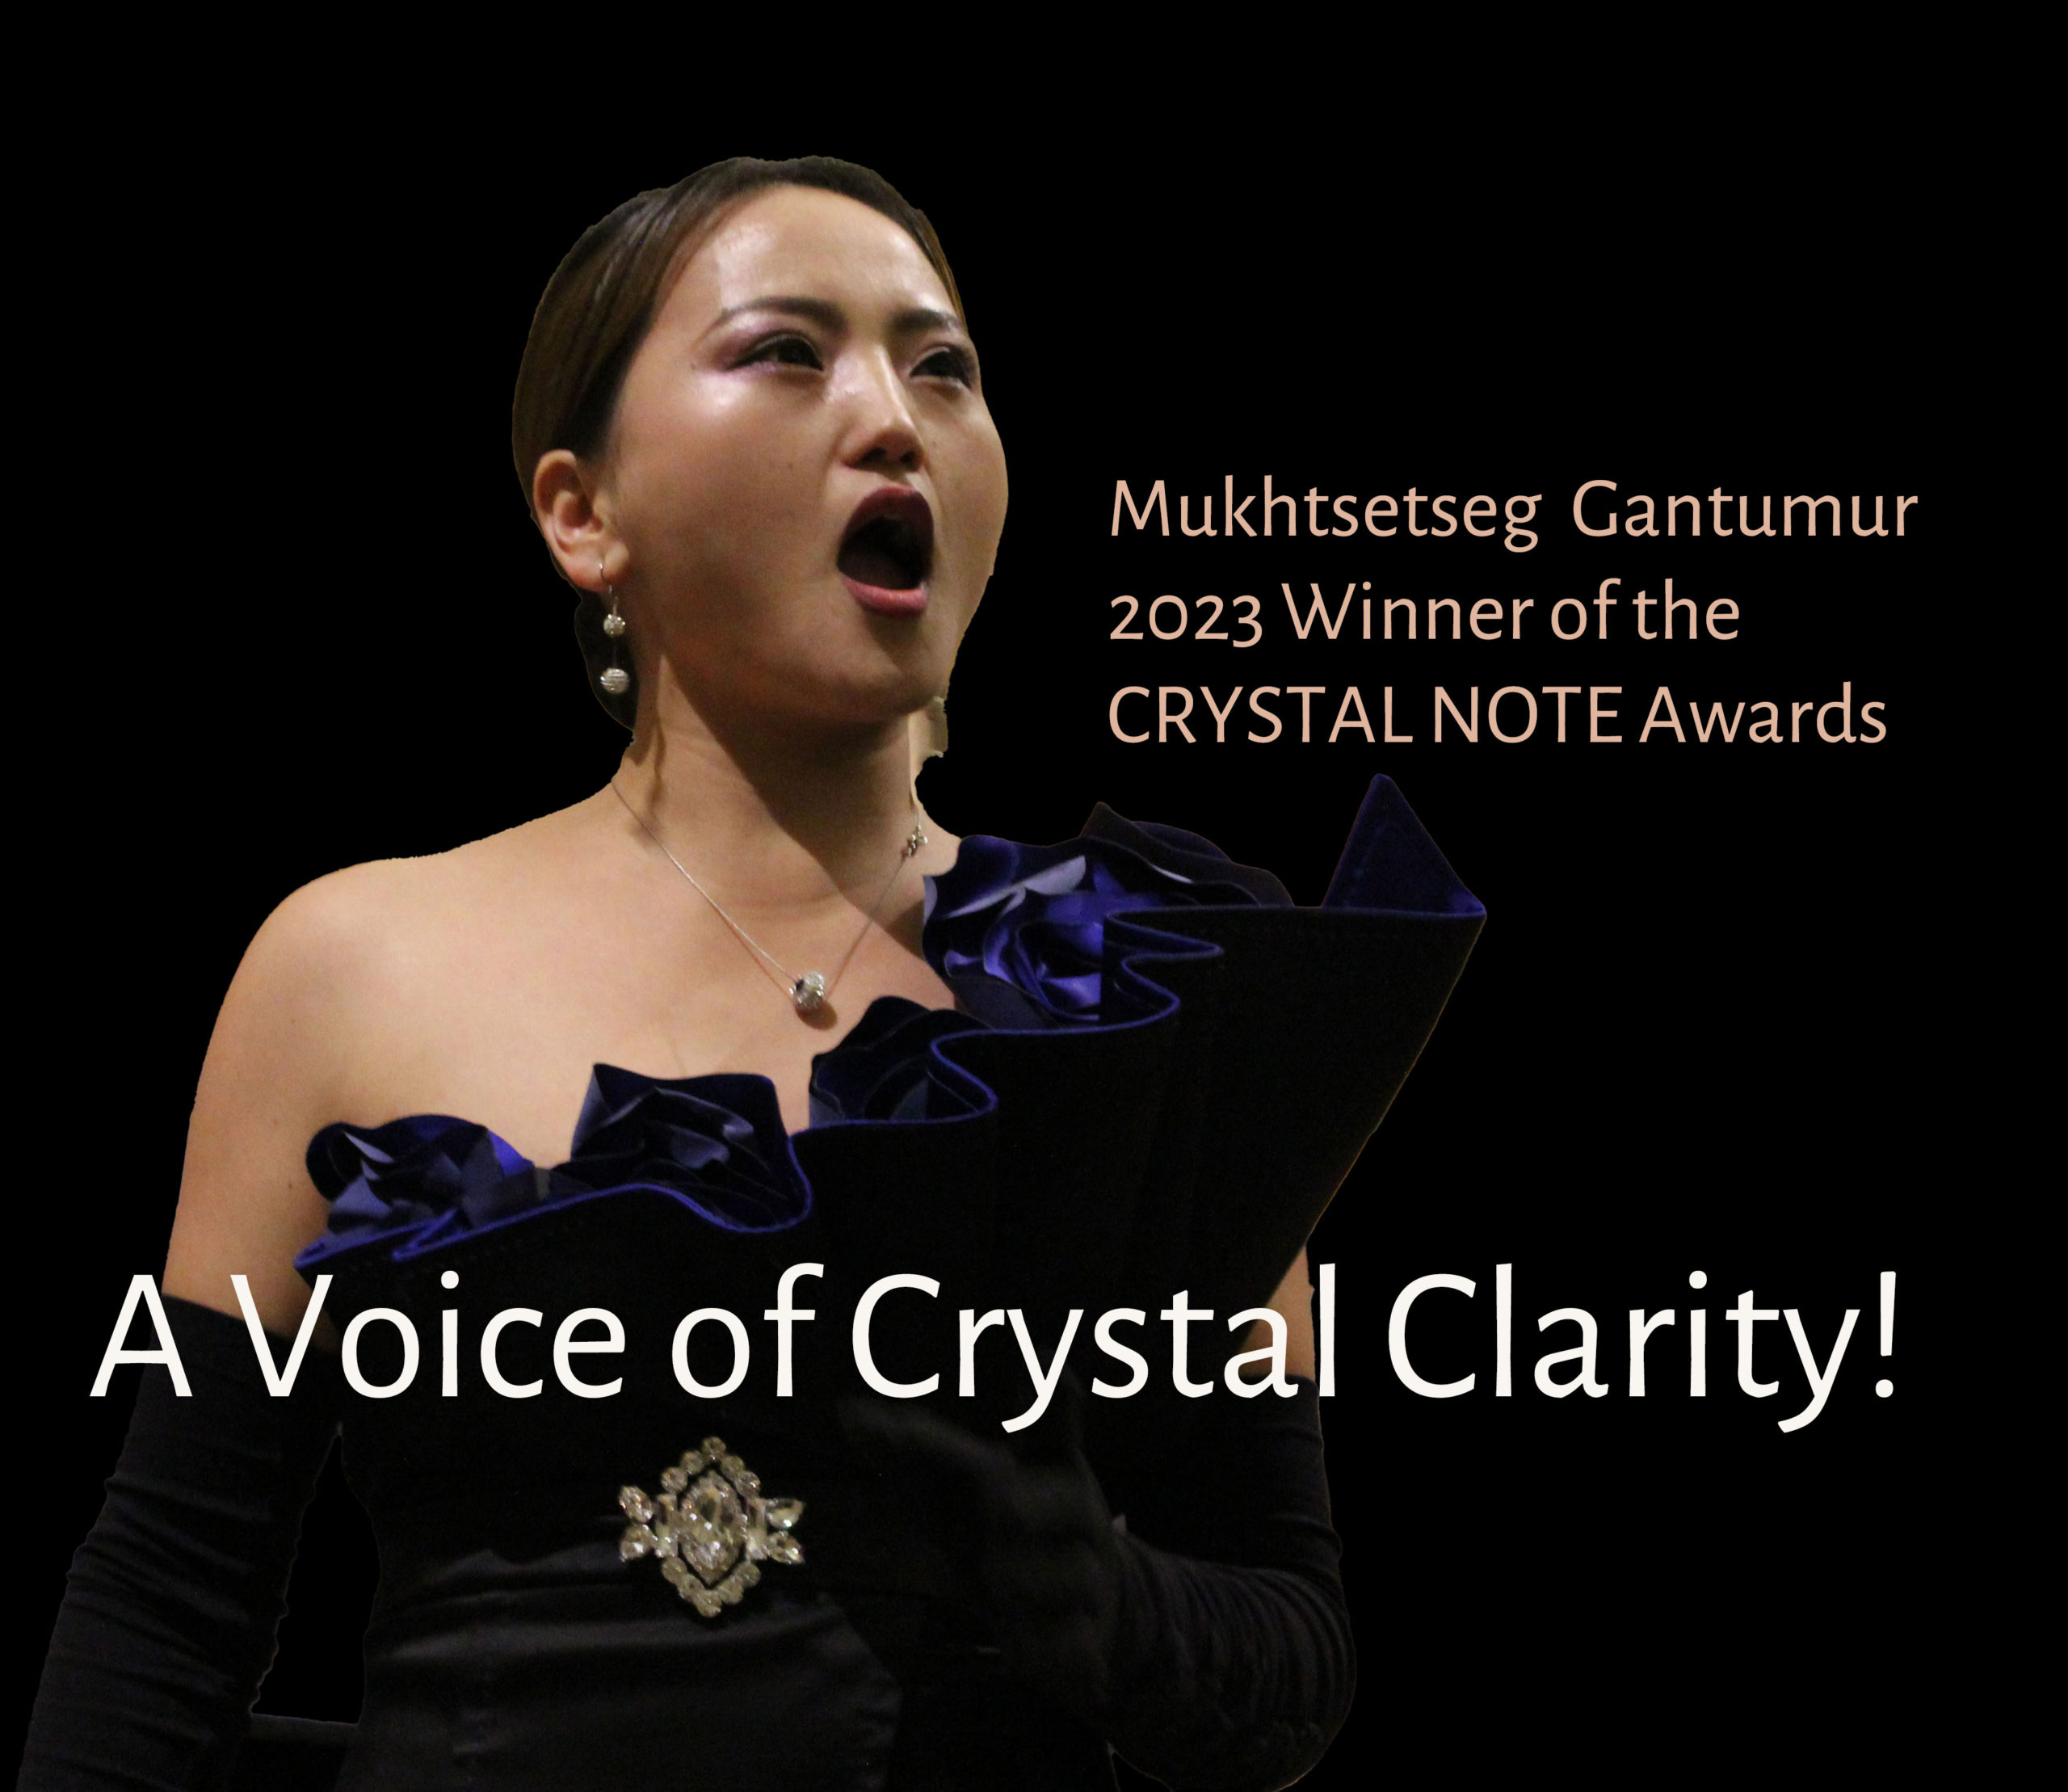 A Voice of Crystal Clarity!